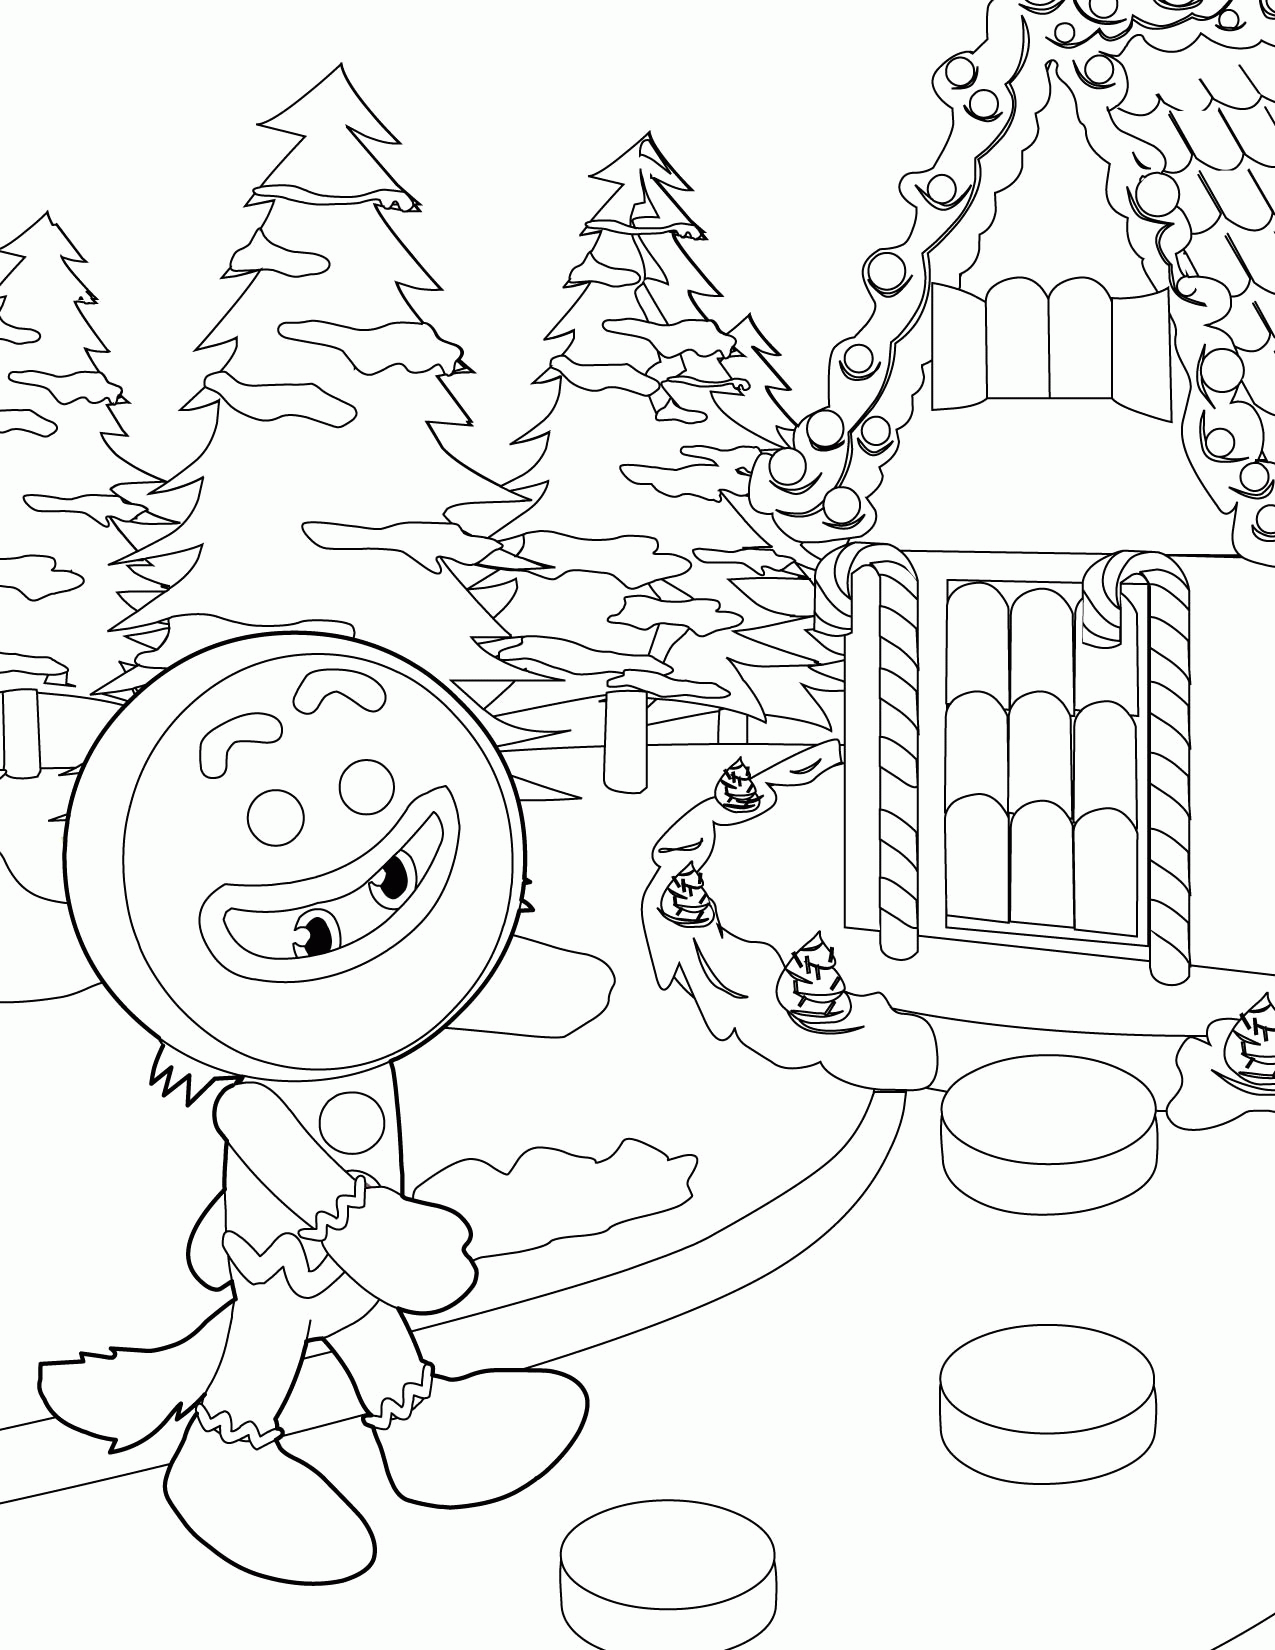 gingerbread man coloring pictures | Only Coloring Pages